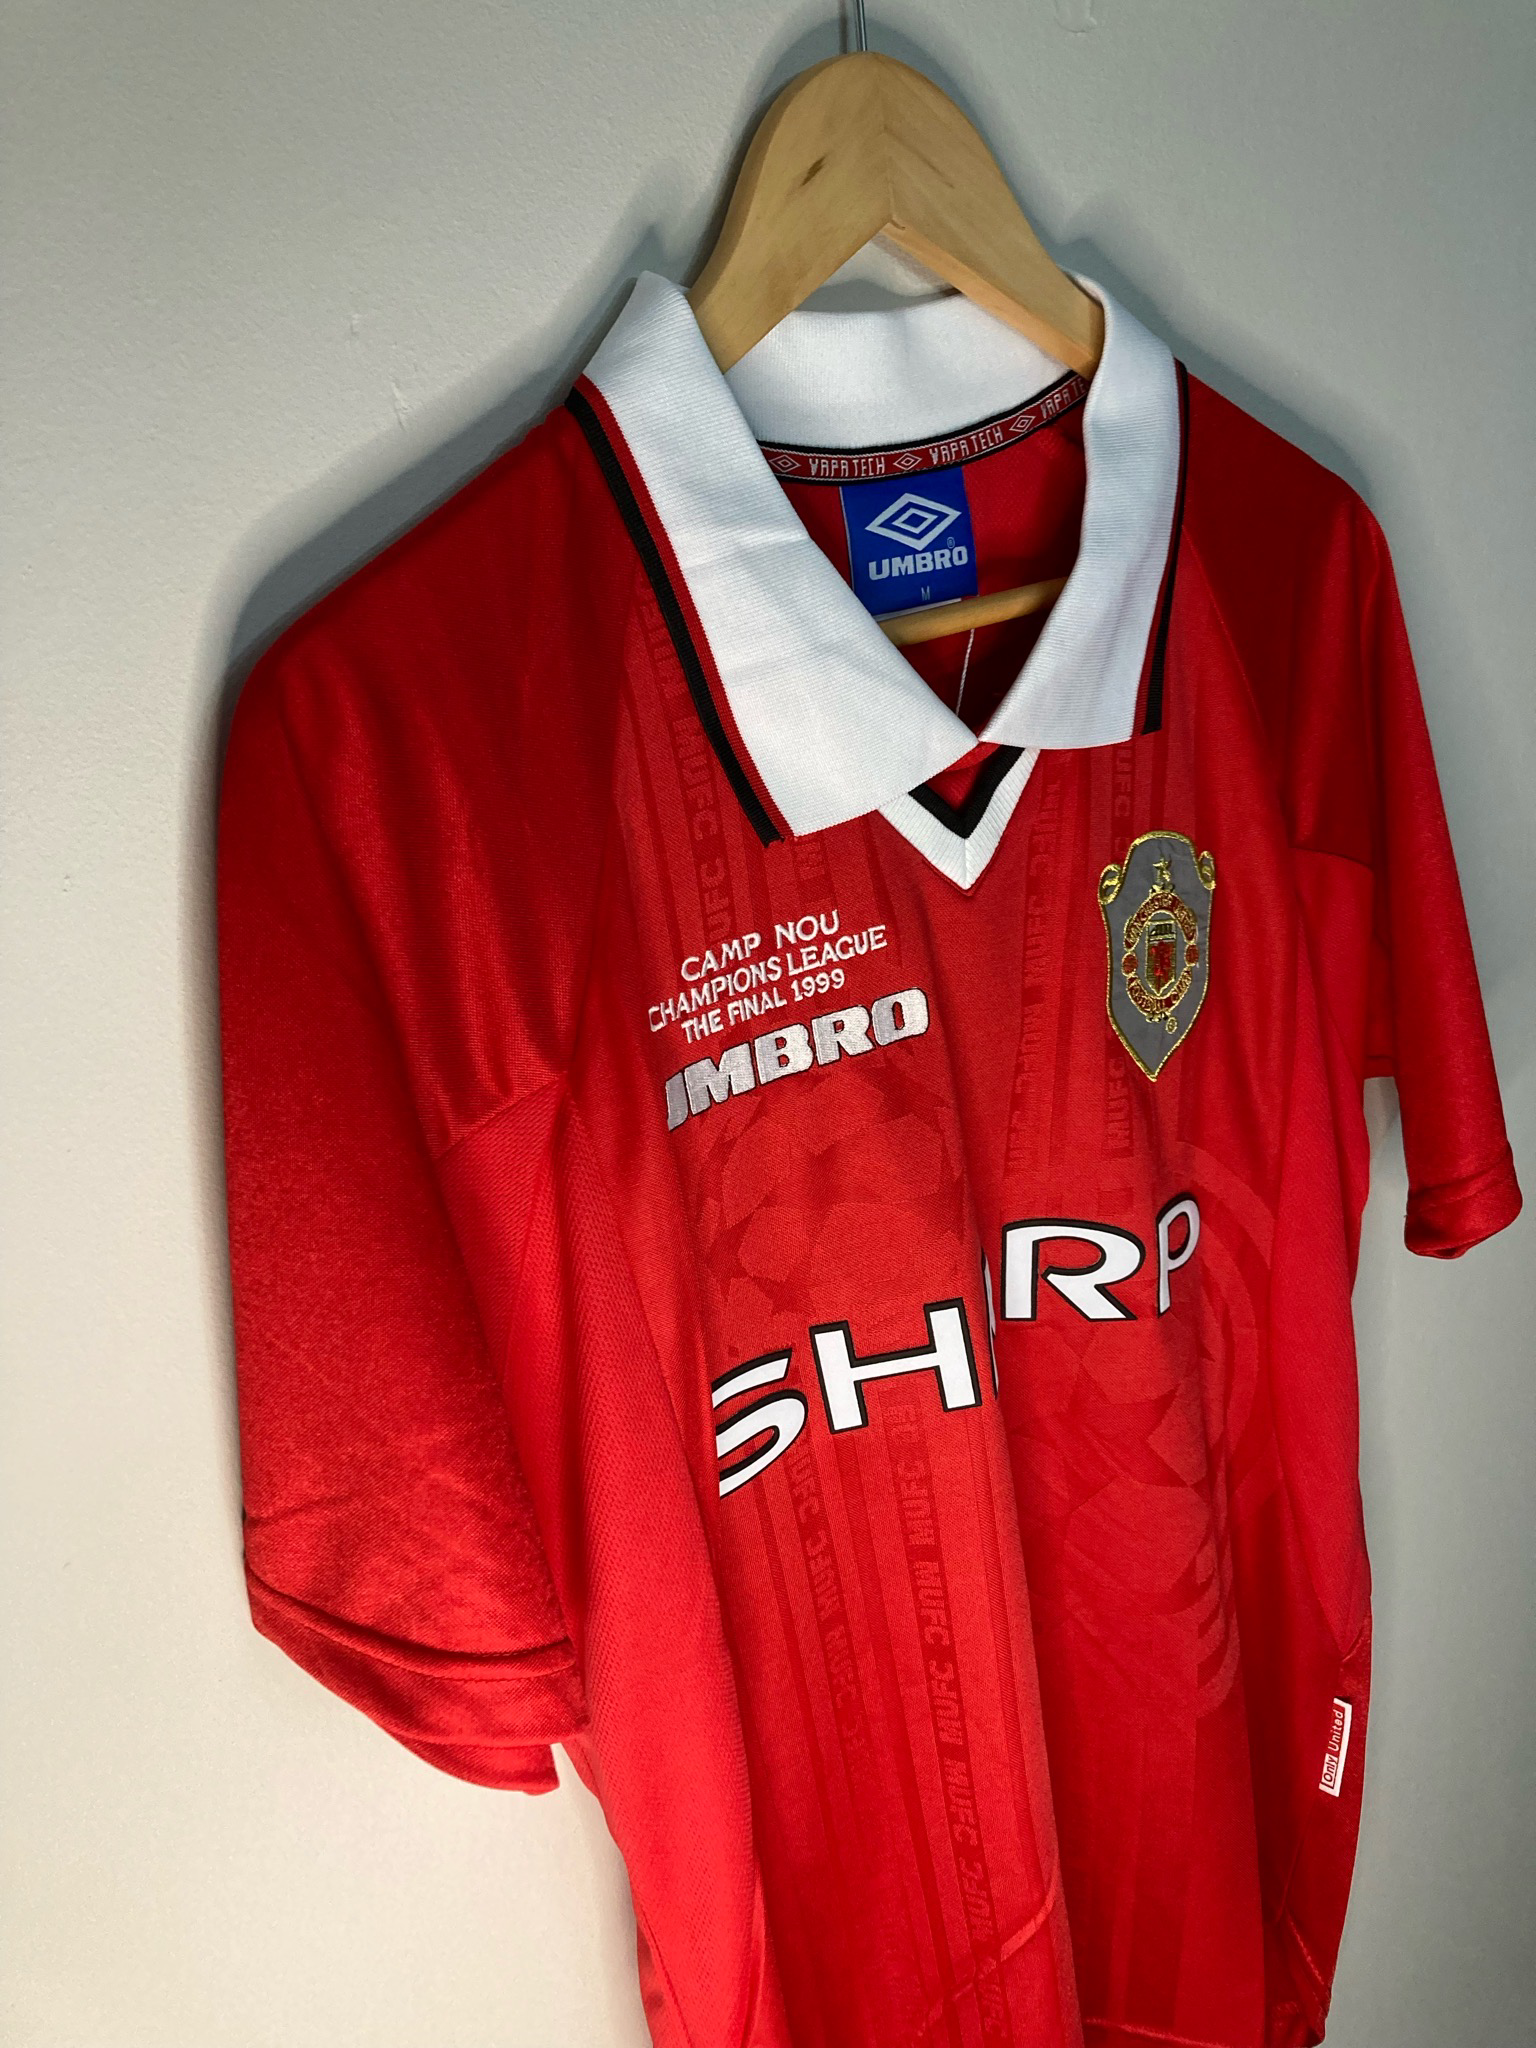 Manchester United retro soccer jersey CL final 1999